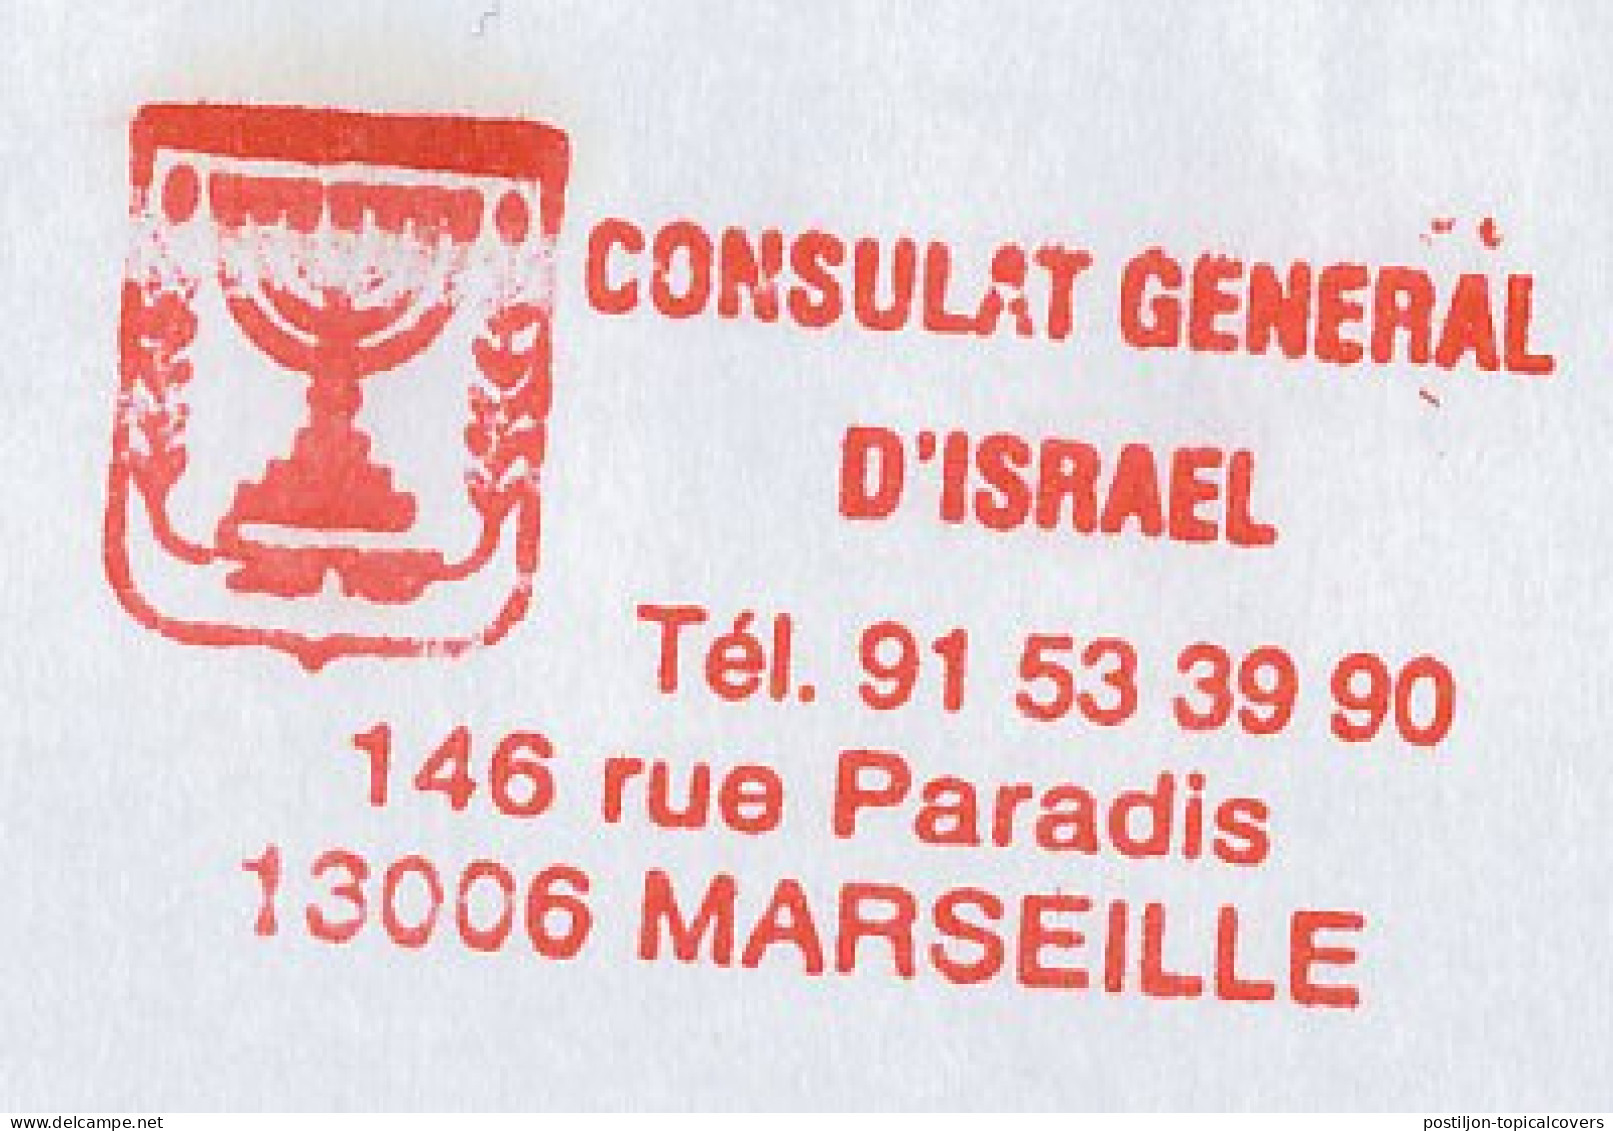 Meter Cover France 2002 Menohra - Israel - Consulate - Unclassified